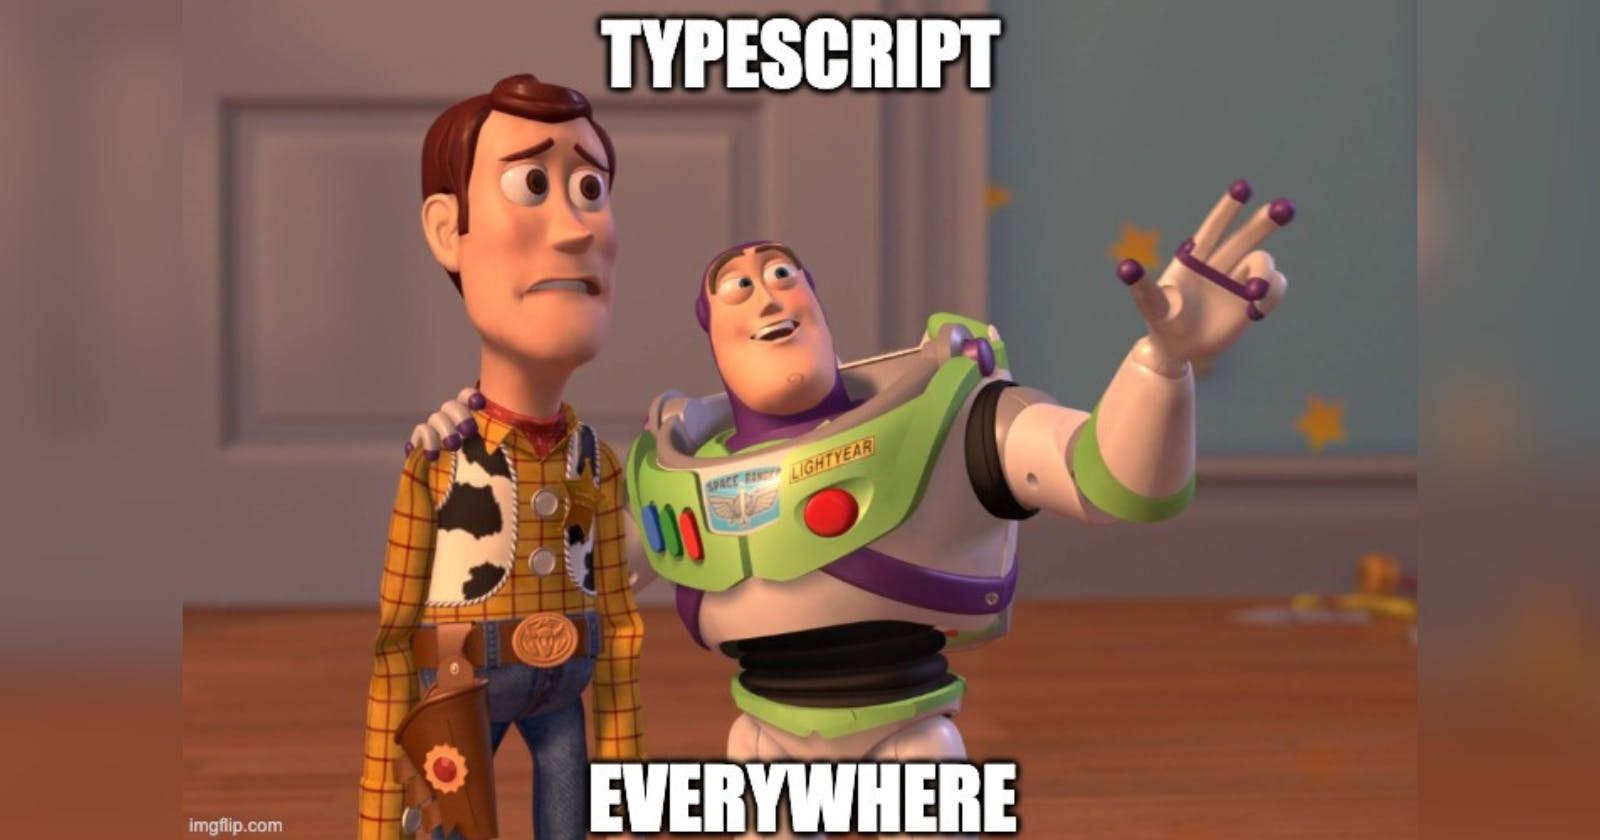 Introduction to TypeScript